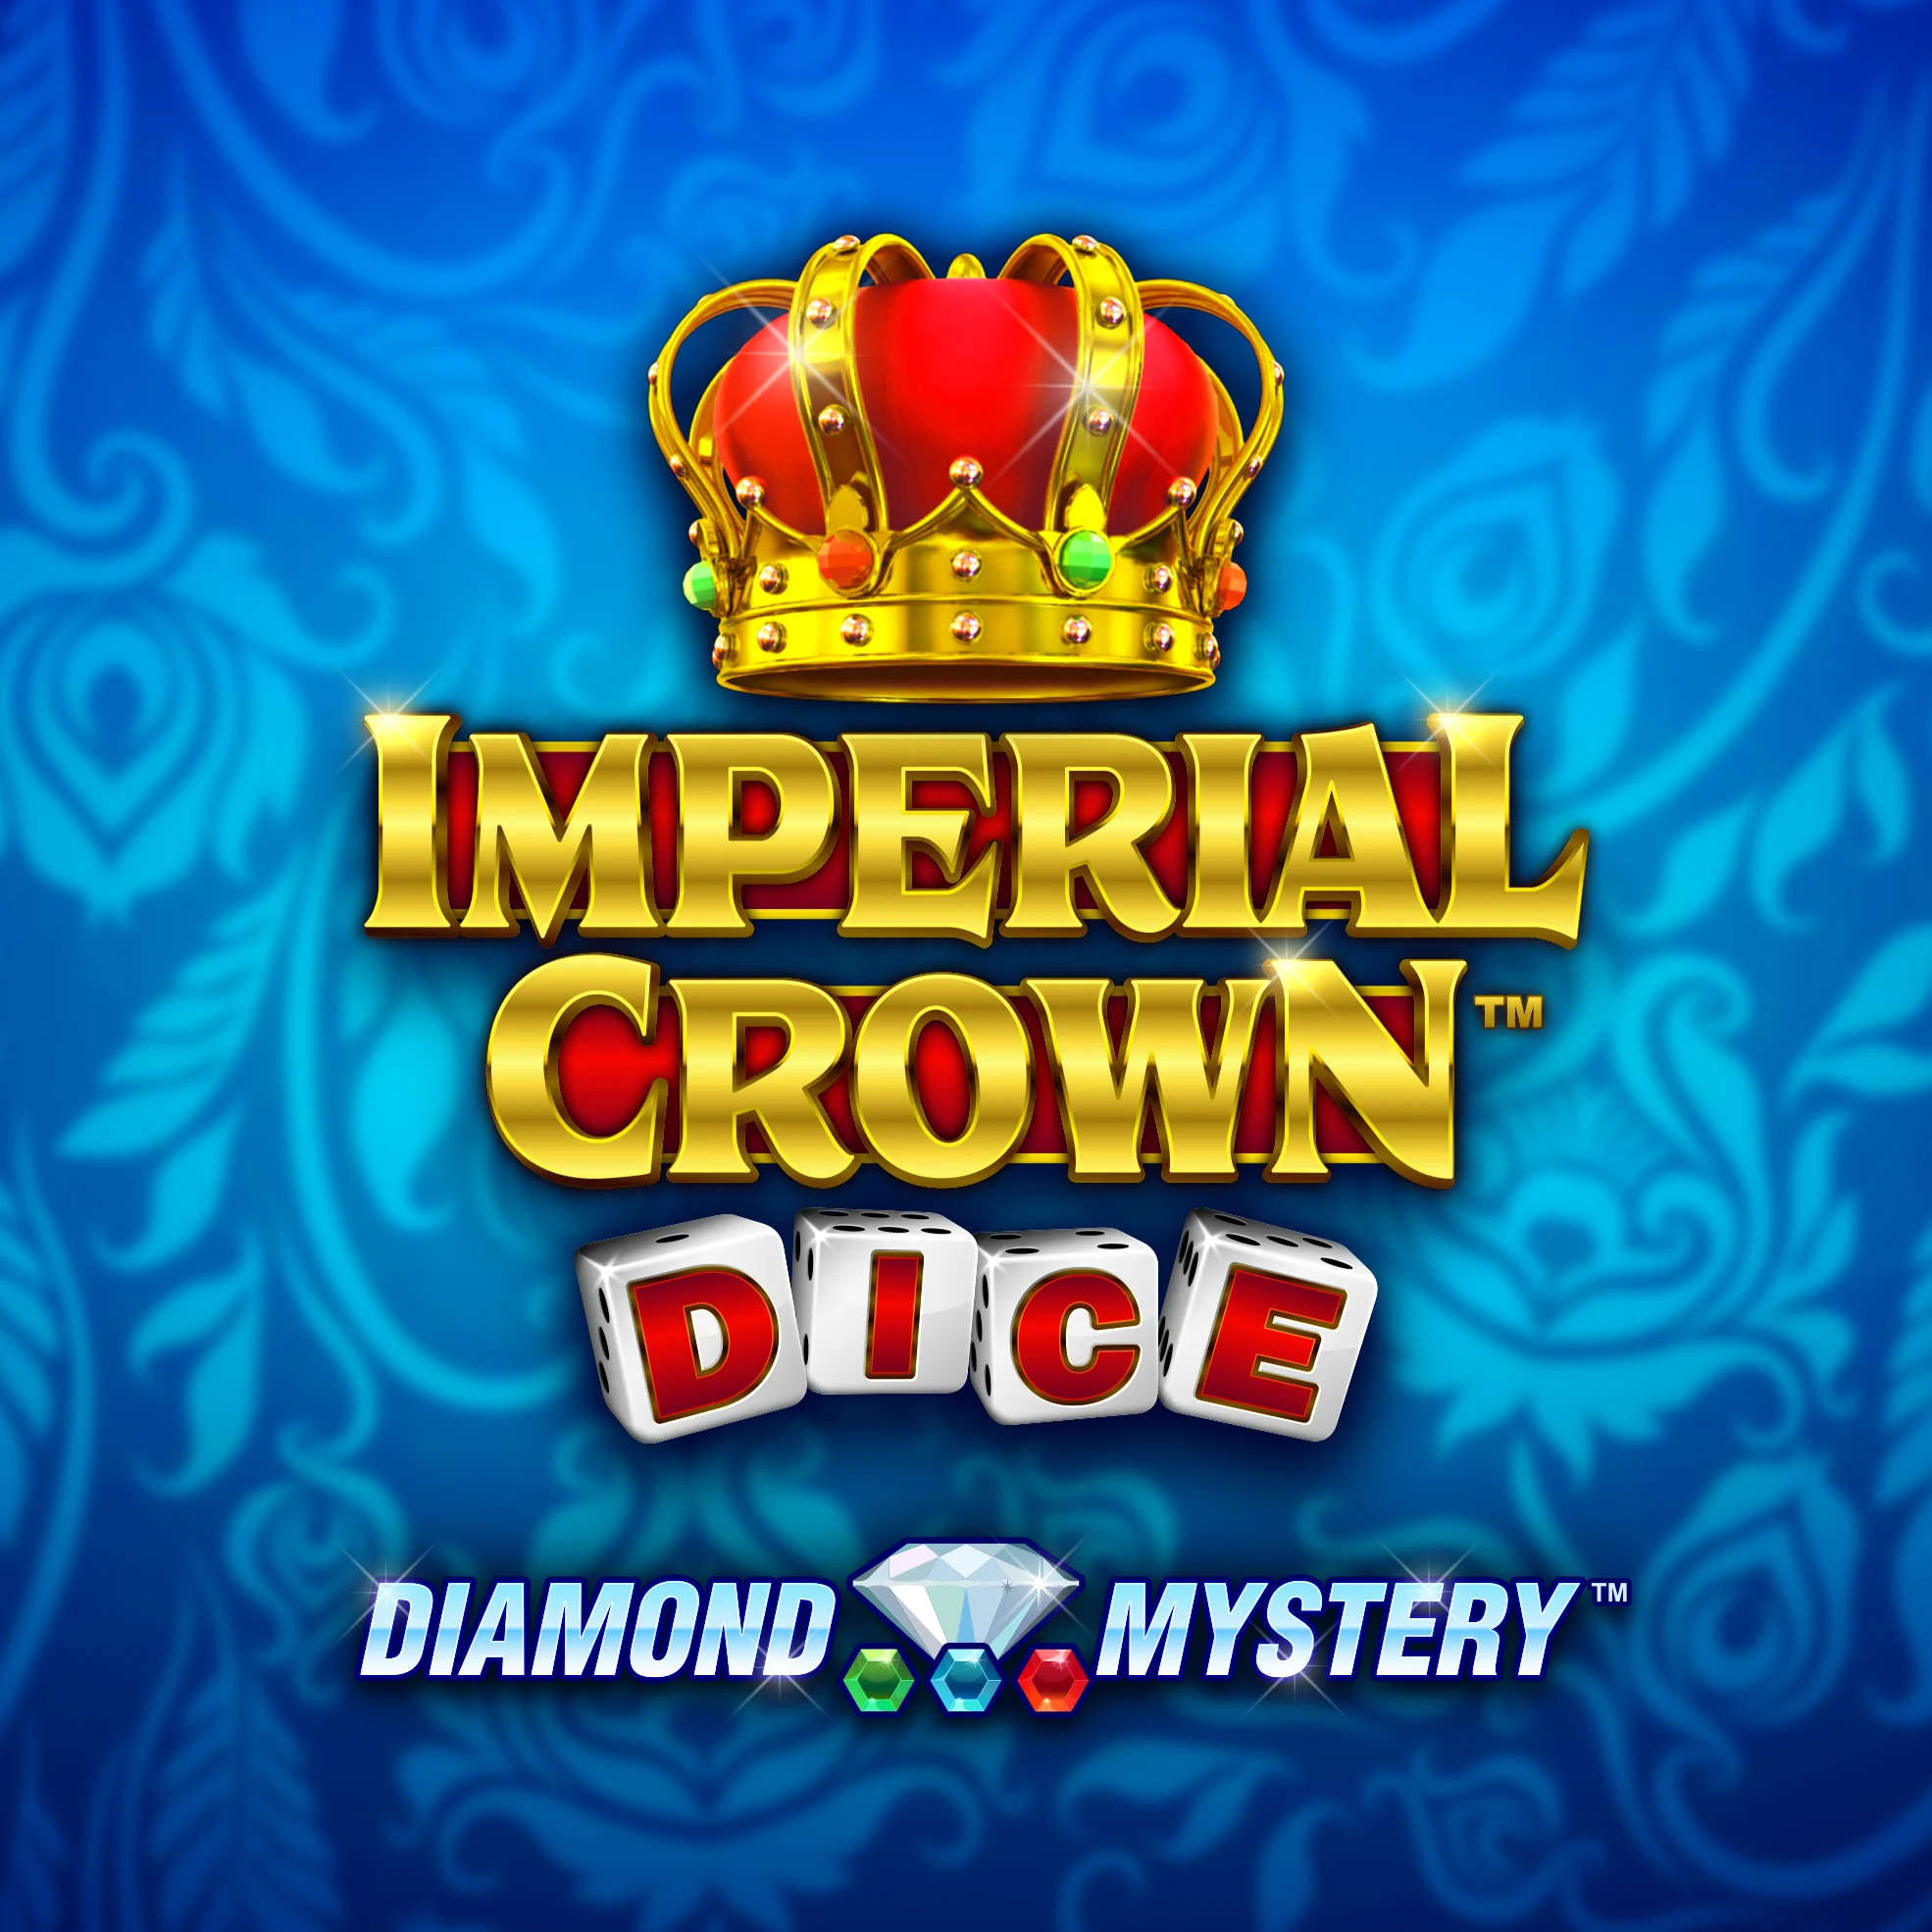 Play Imperial Crown™ Dice on Starcasinodice online casino